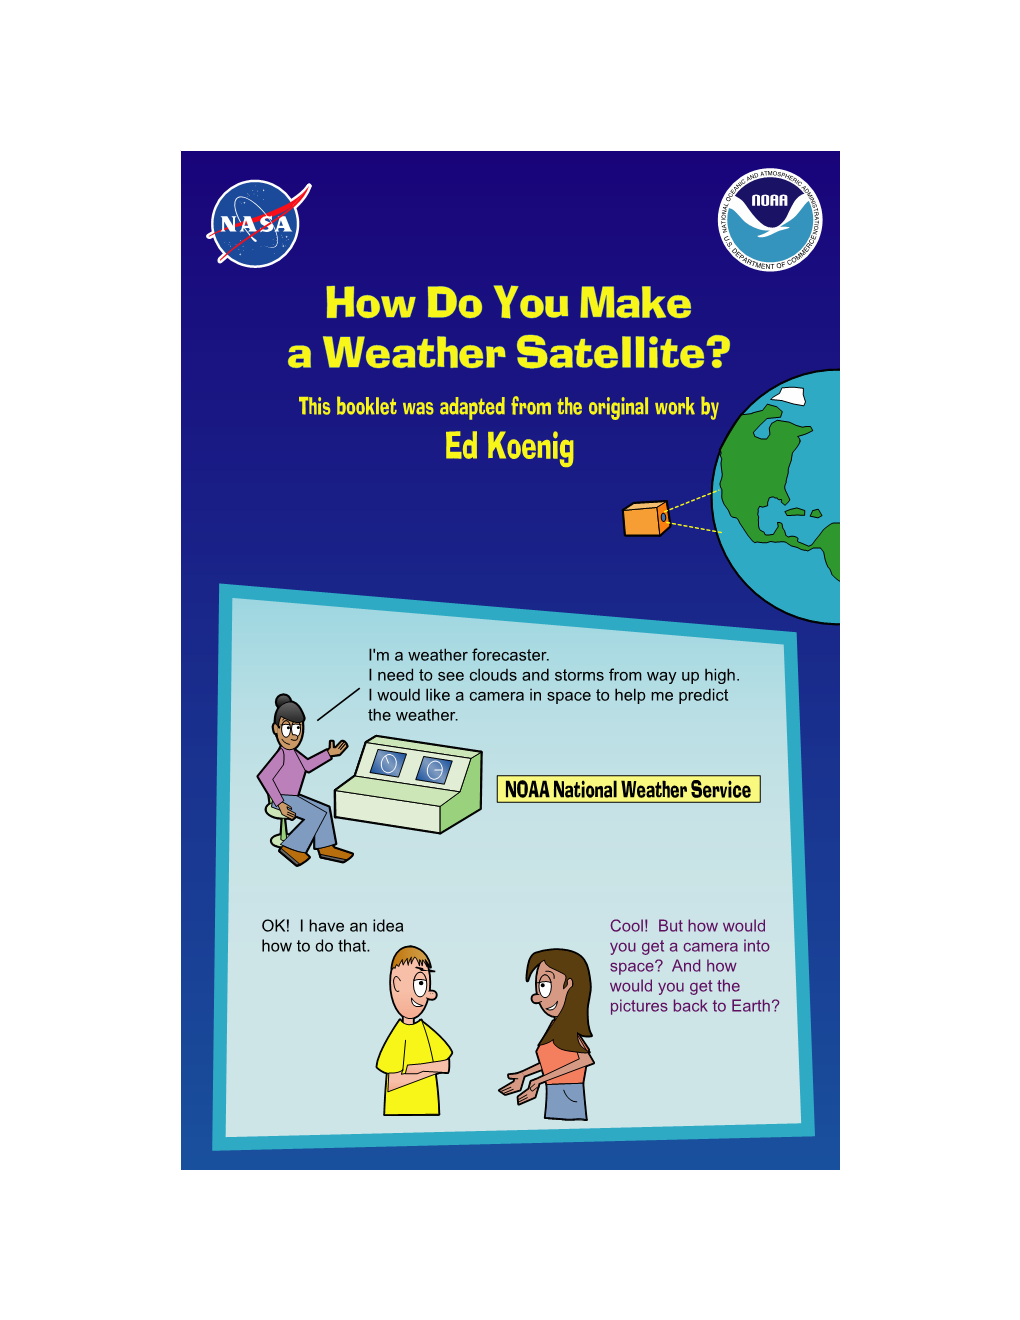 How Do You Make a Weather Satellite?